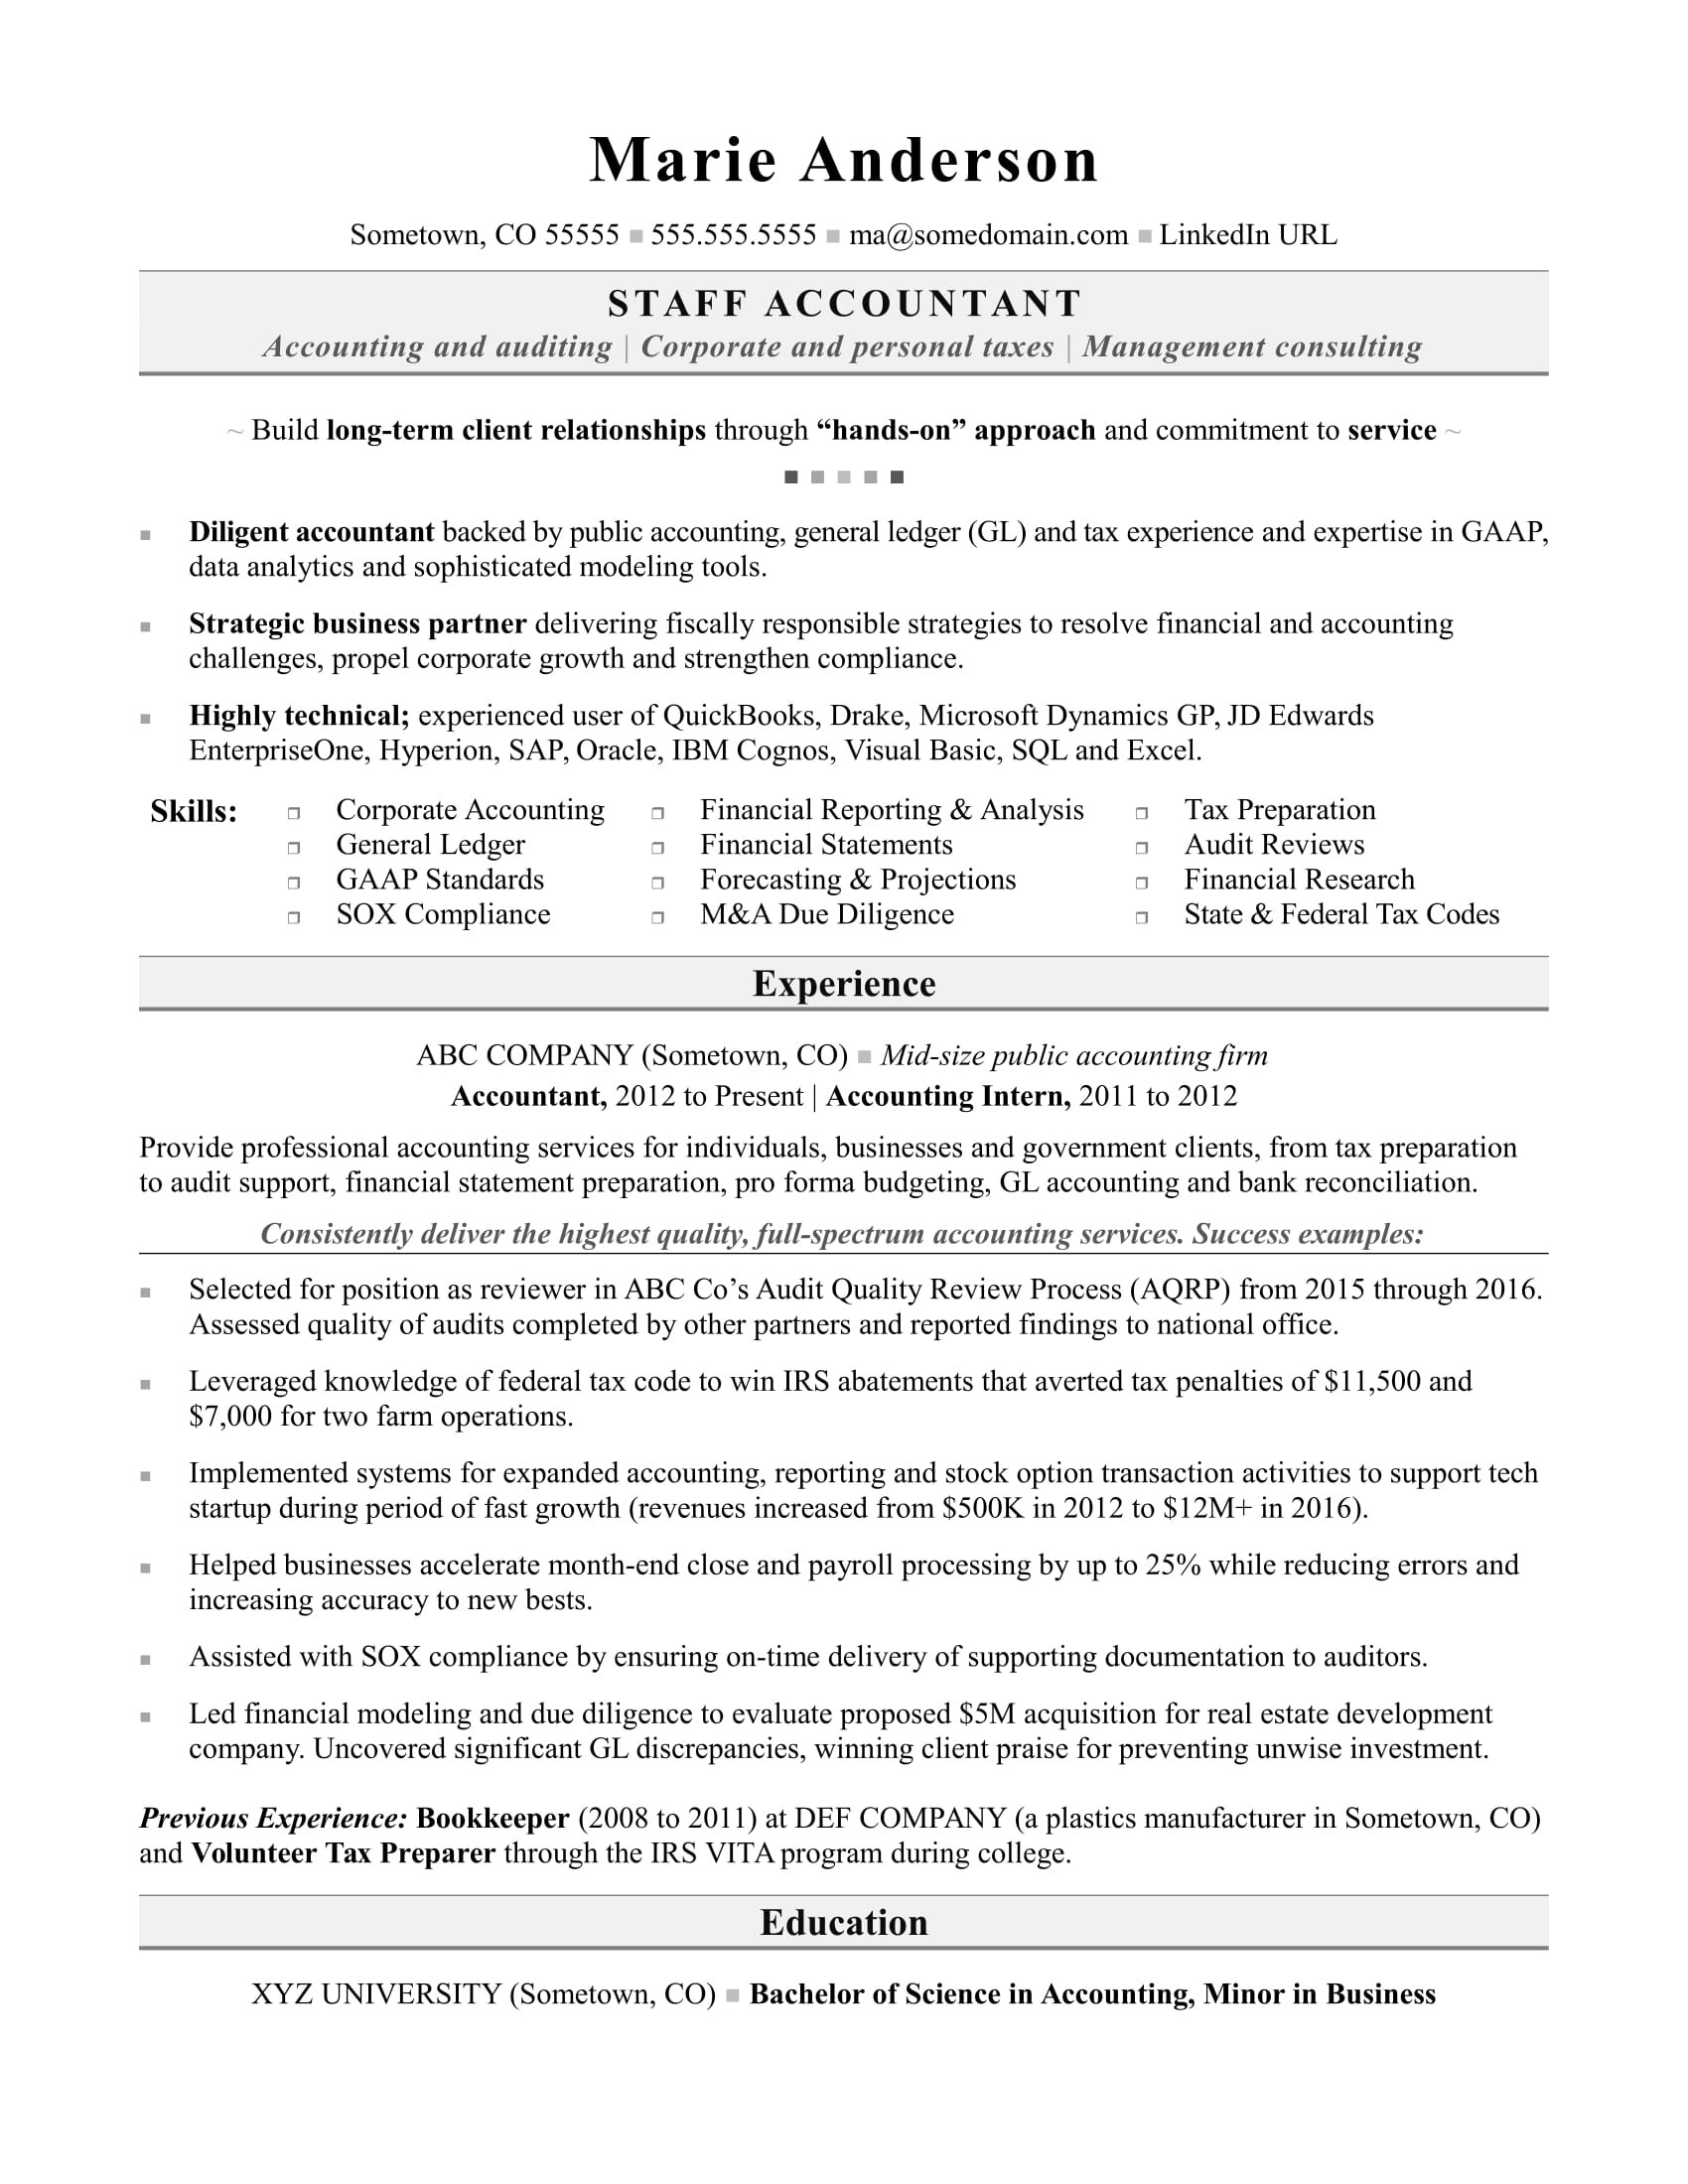 Sample Resume Accountant Commercial Real Estate Accountant Resume Monster.com